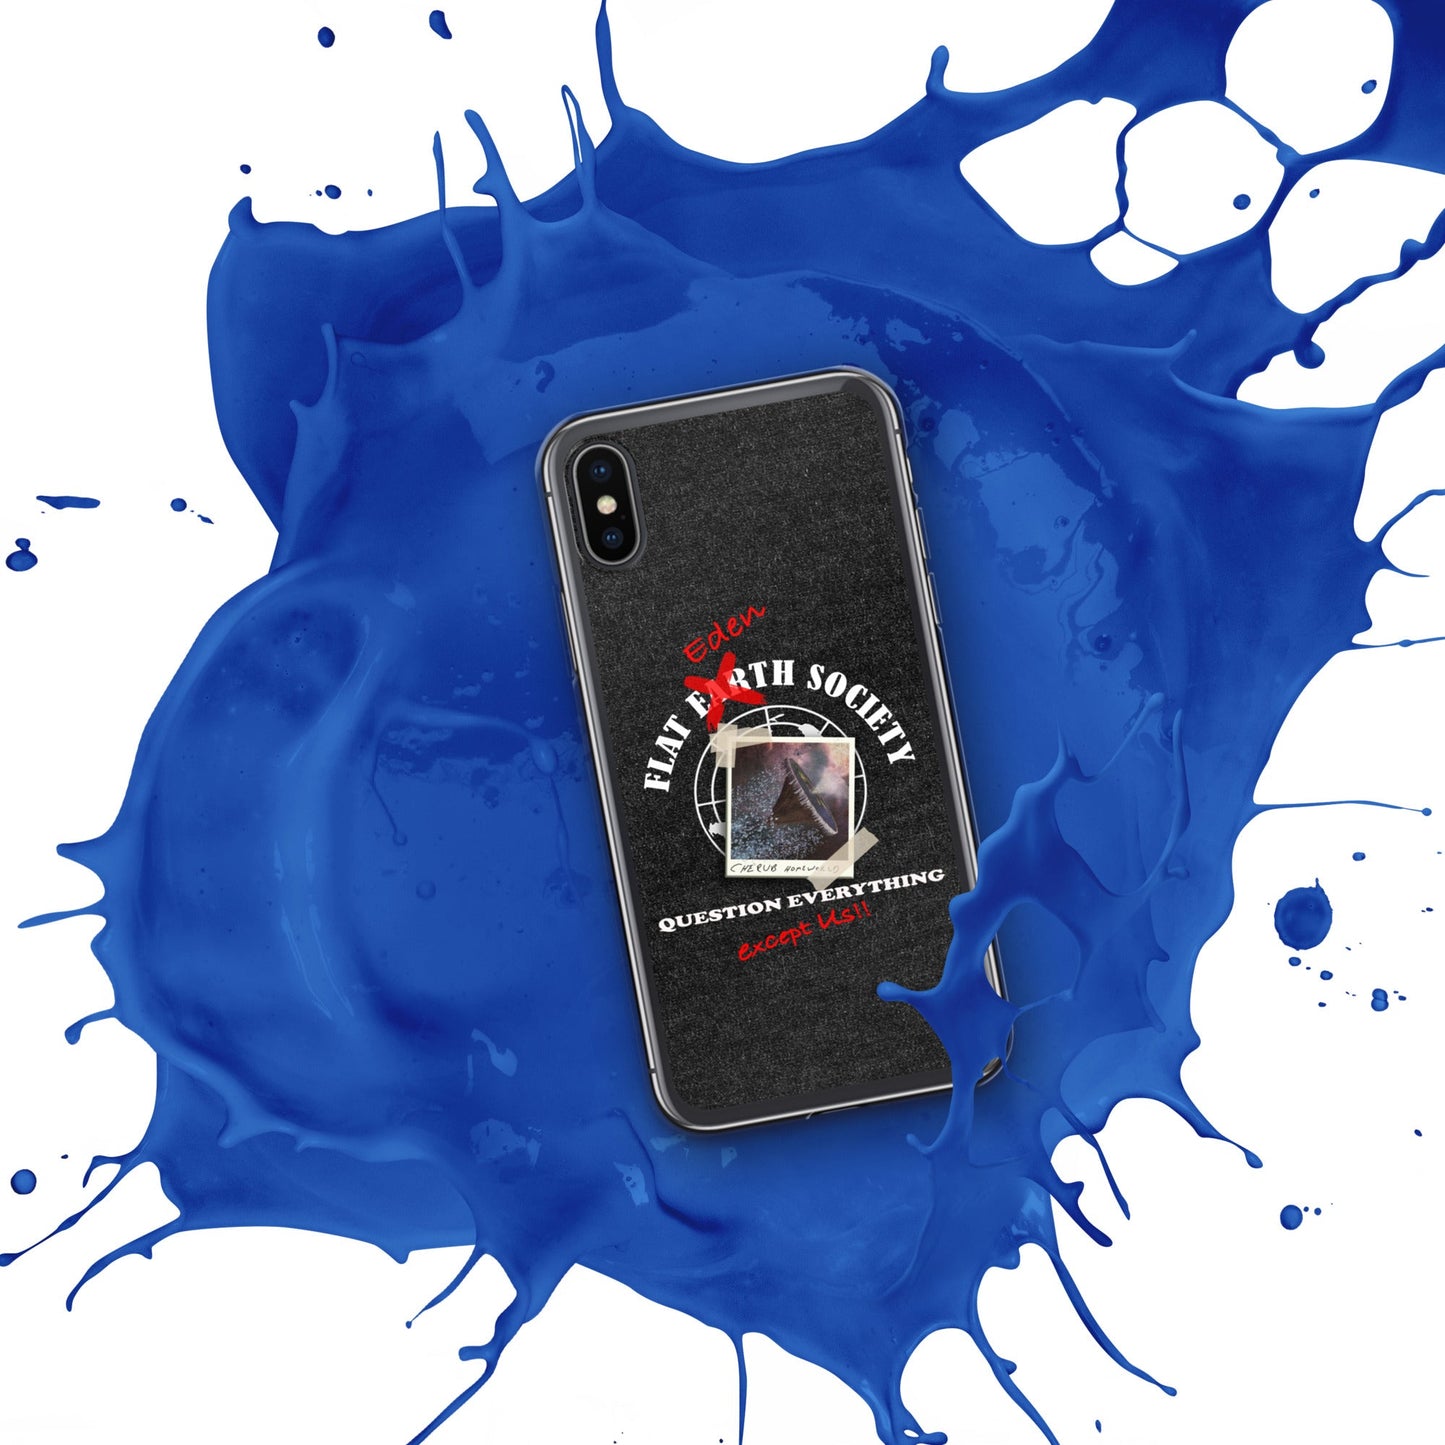 iPhone Case | Intergalactic Space Force 2 | Flat Eden Society - Spectral Ink Shop - Mobile Phone Cases -9780728_8933